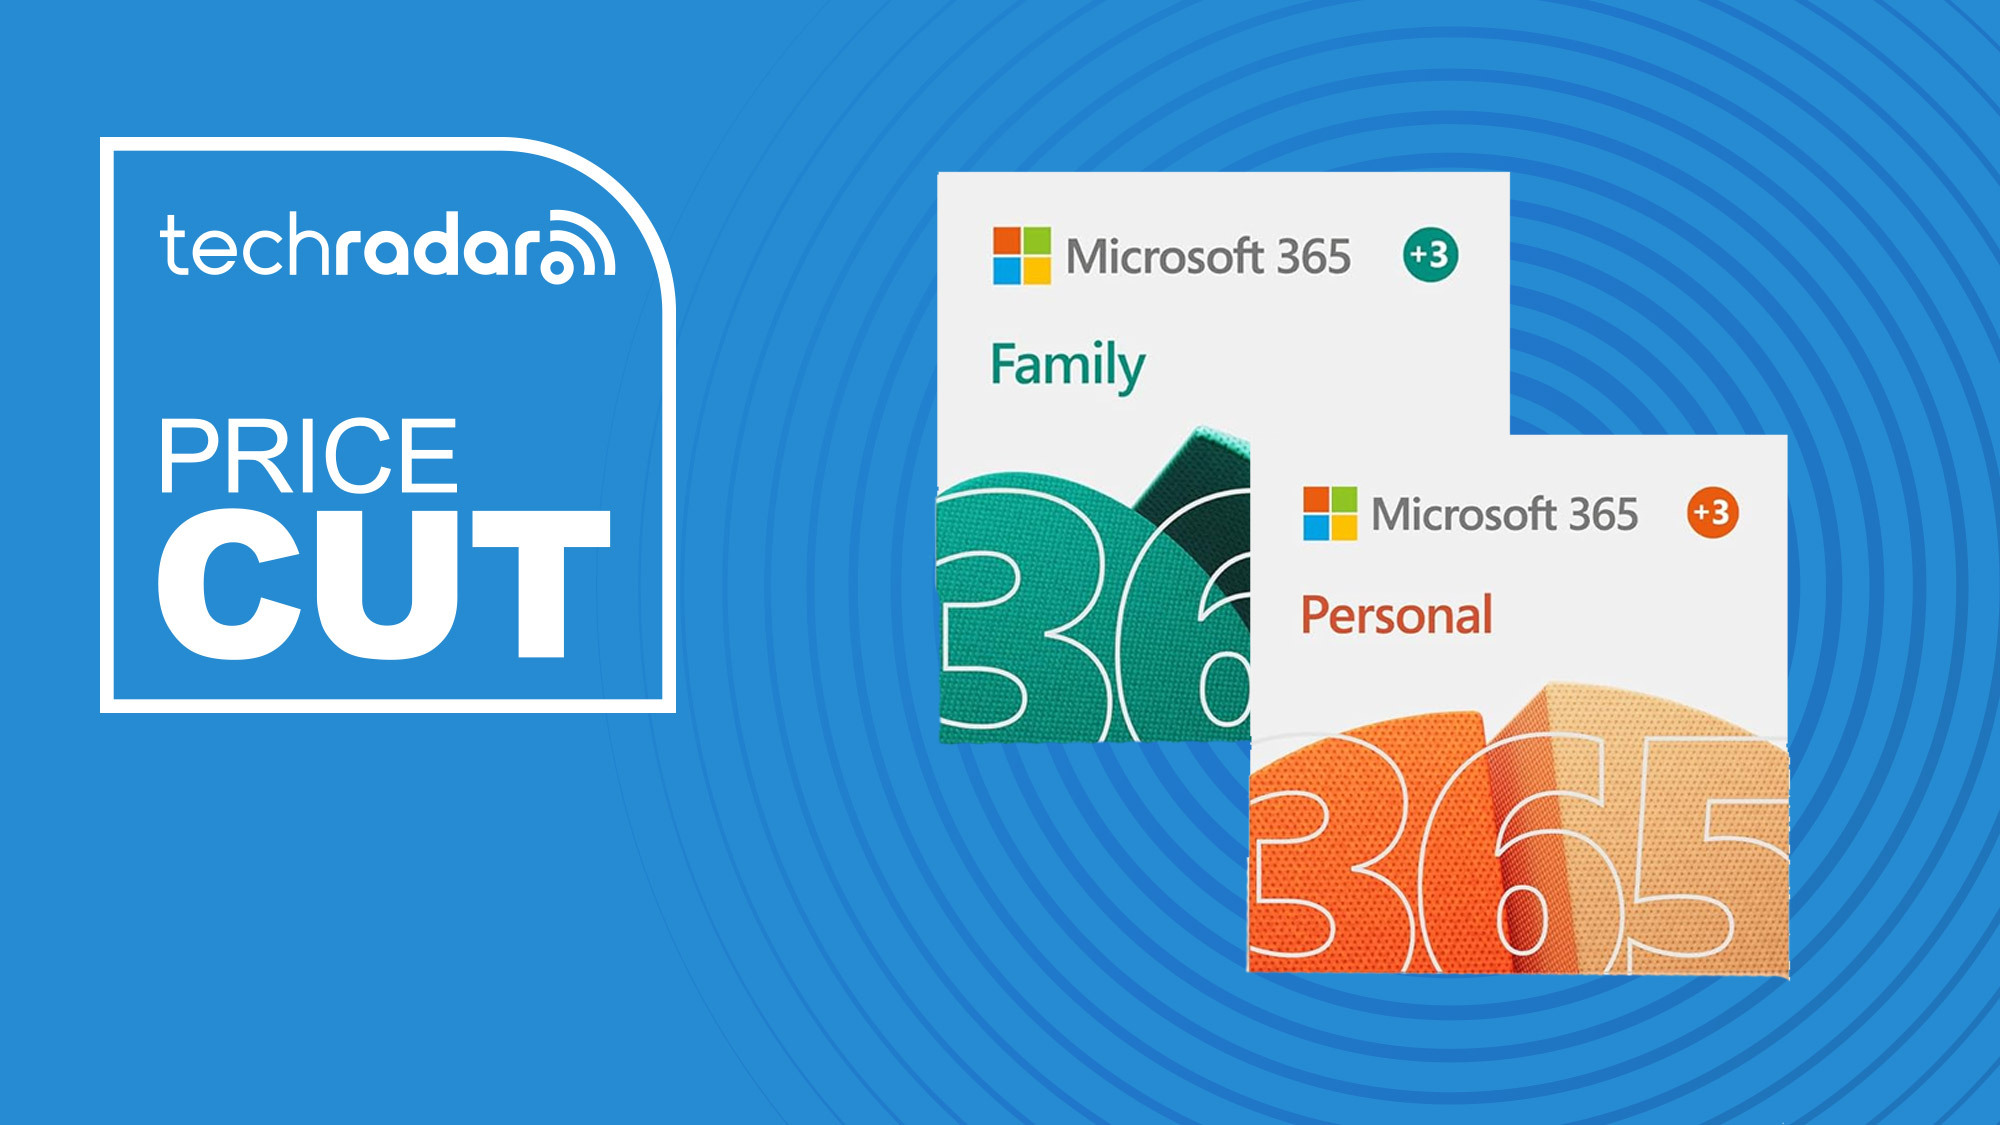 Renew your Microsoft 365 subscription now to save 30% – and get three months free